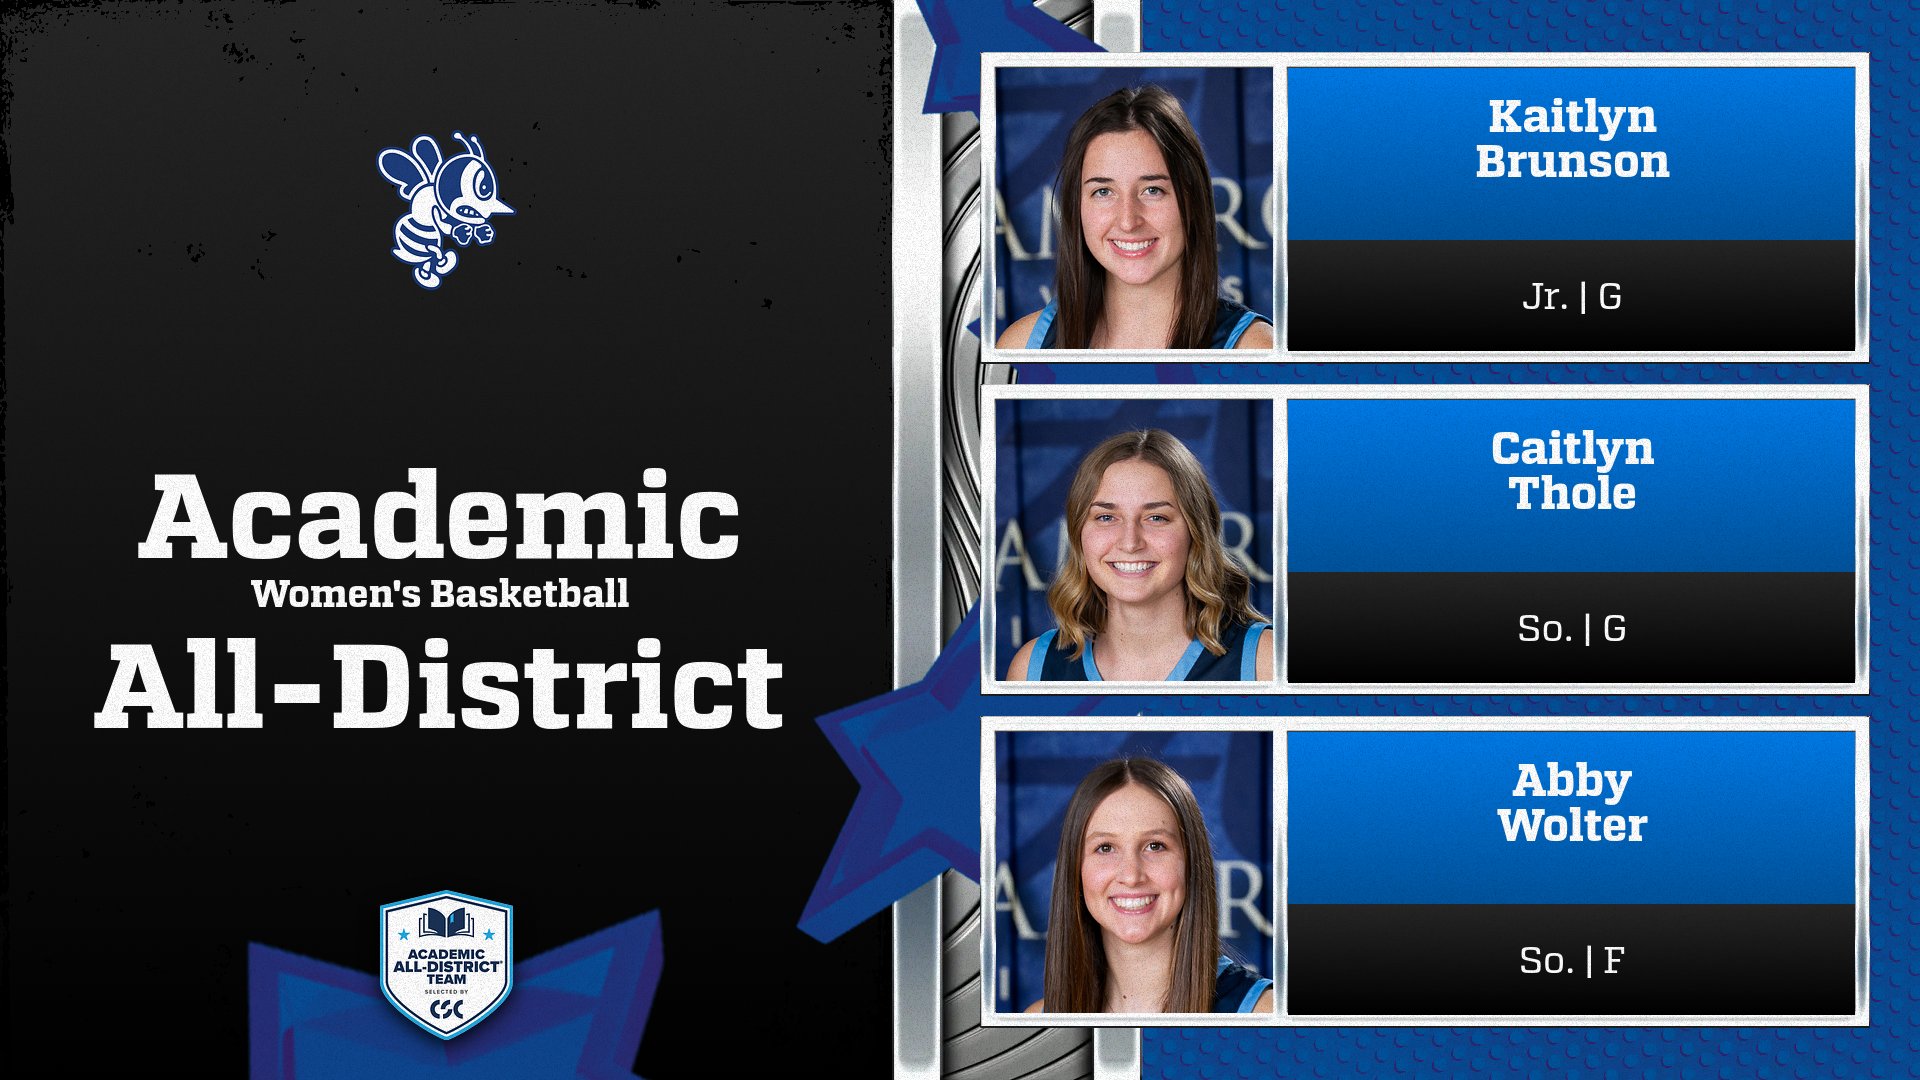 Brunson, Thole, Wolter named to CSC Academic All-District team